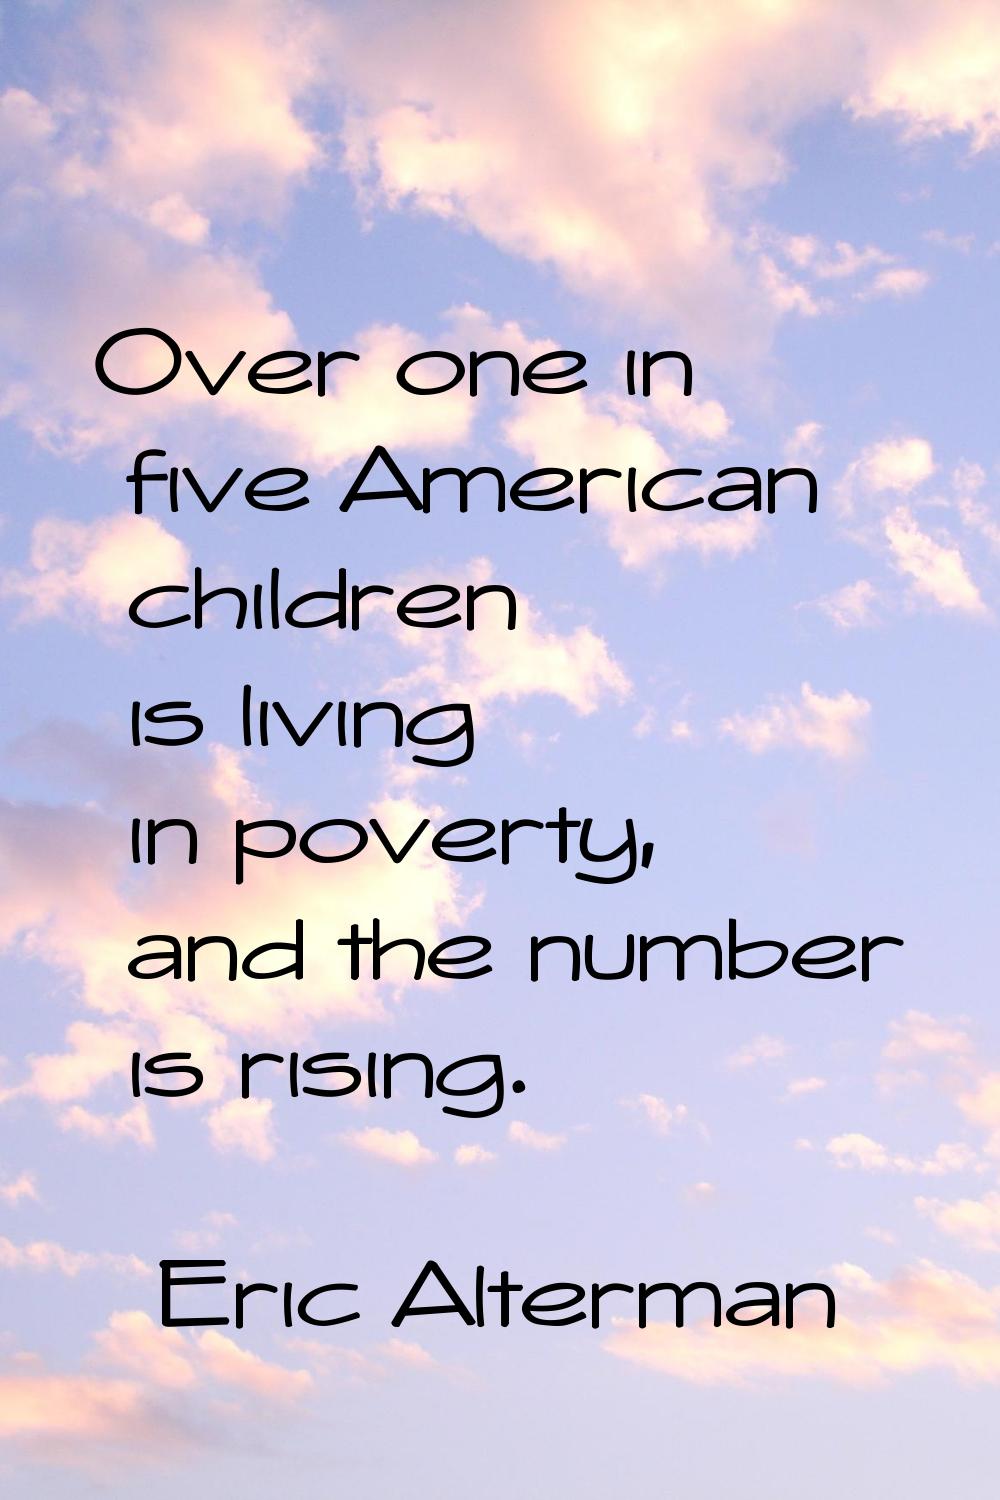 Over one in five American children is living in poverty, and the number is rising.